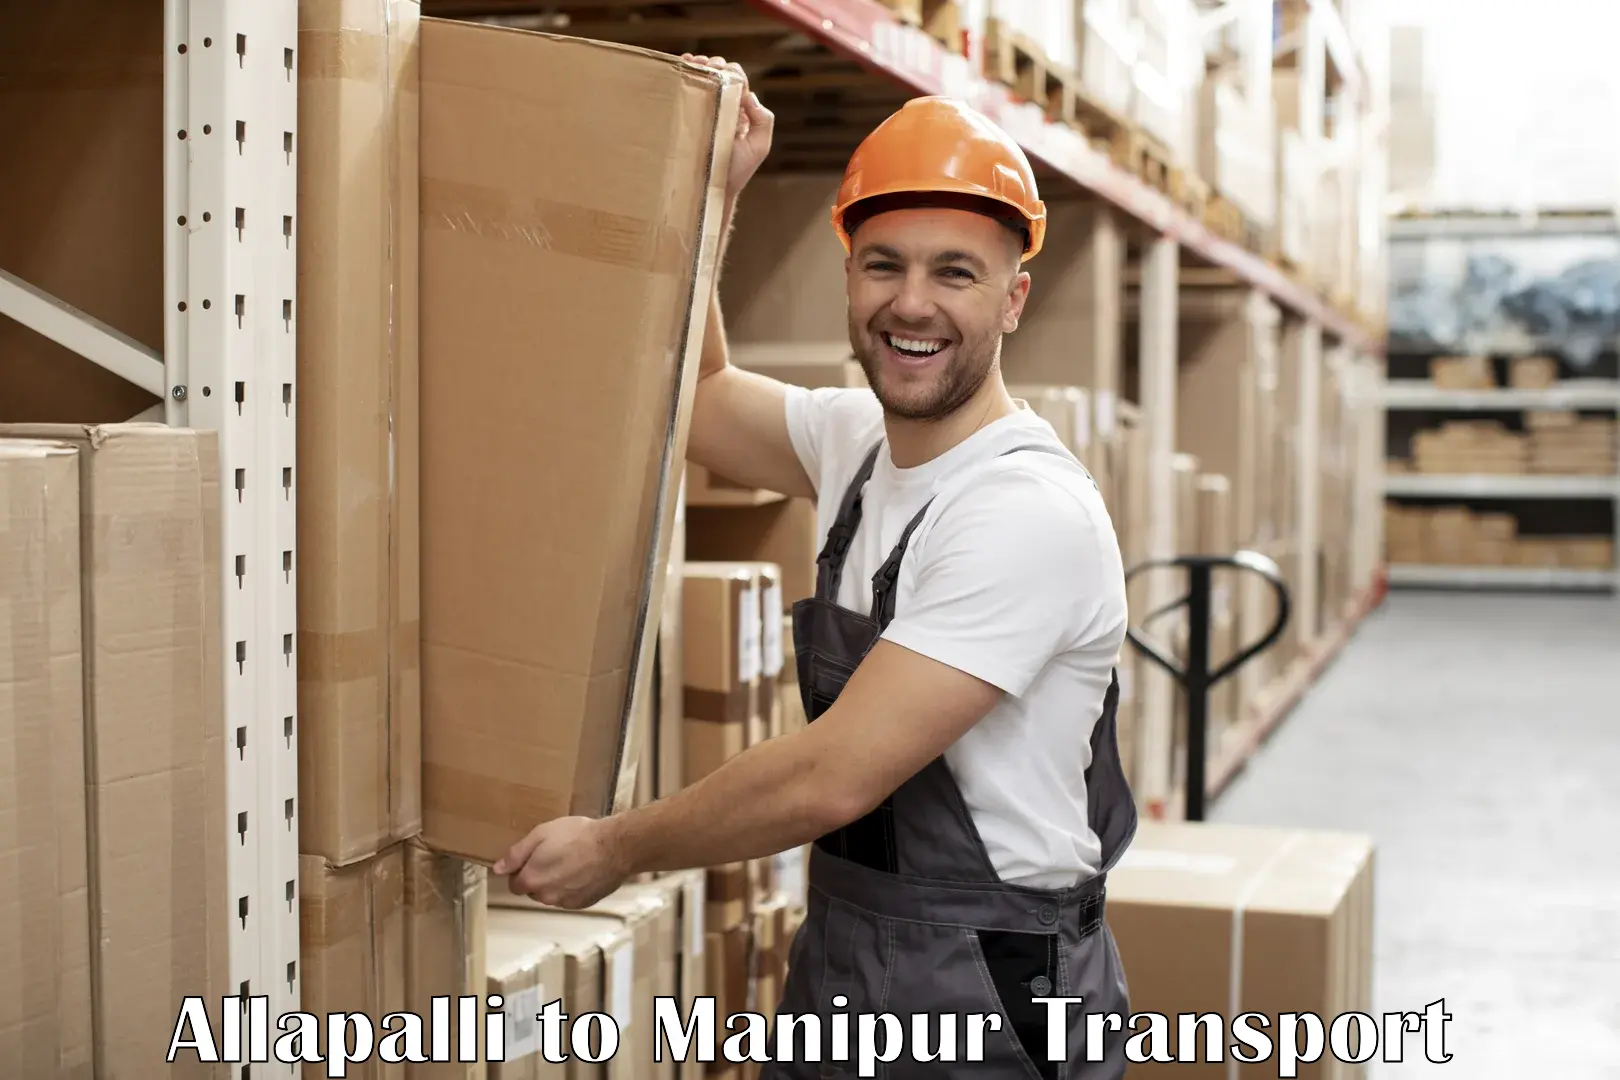 Cycle transportation service Allapalli to Imphal